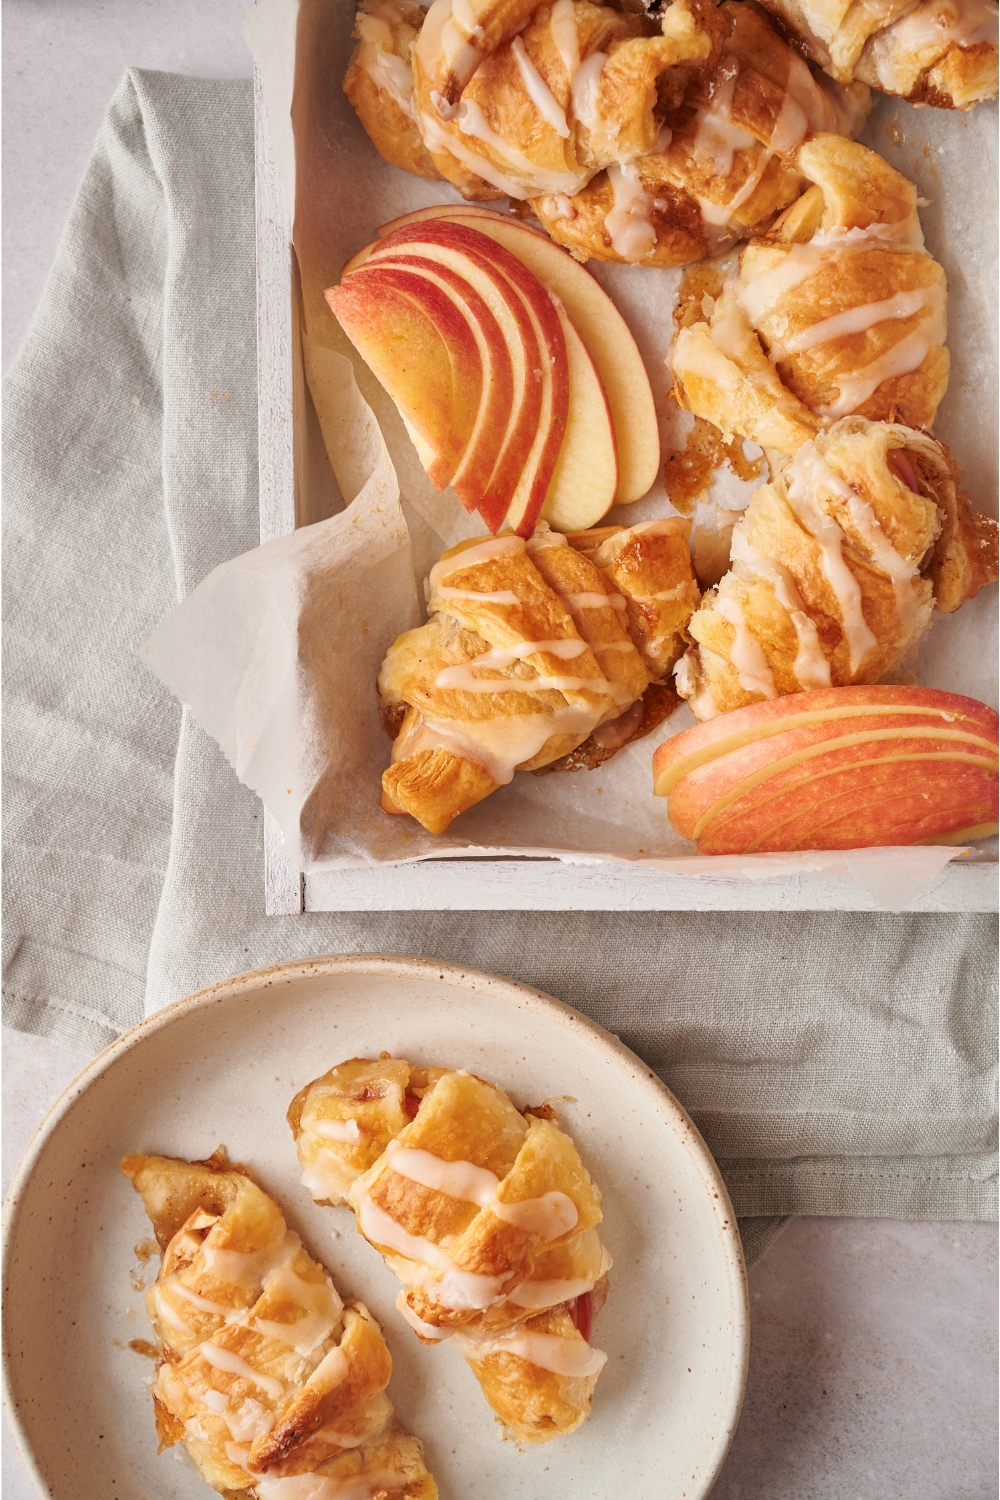 A dish lined with parchment paper filled with baked apple turnovers and apple slices next to a plate with two apple turnovers.